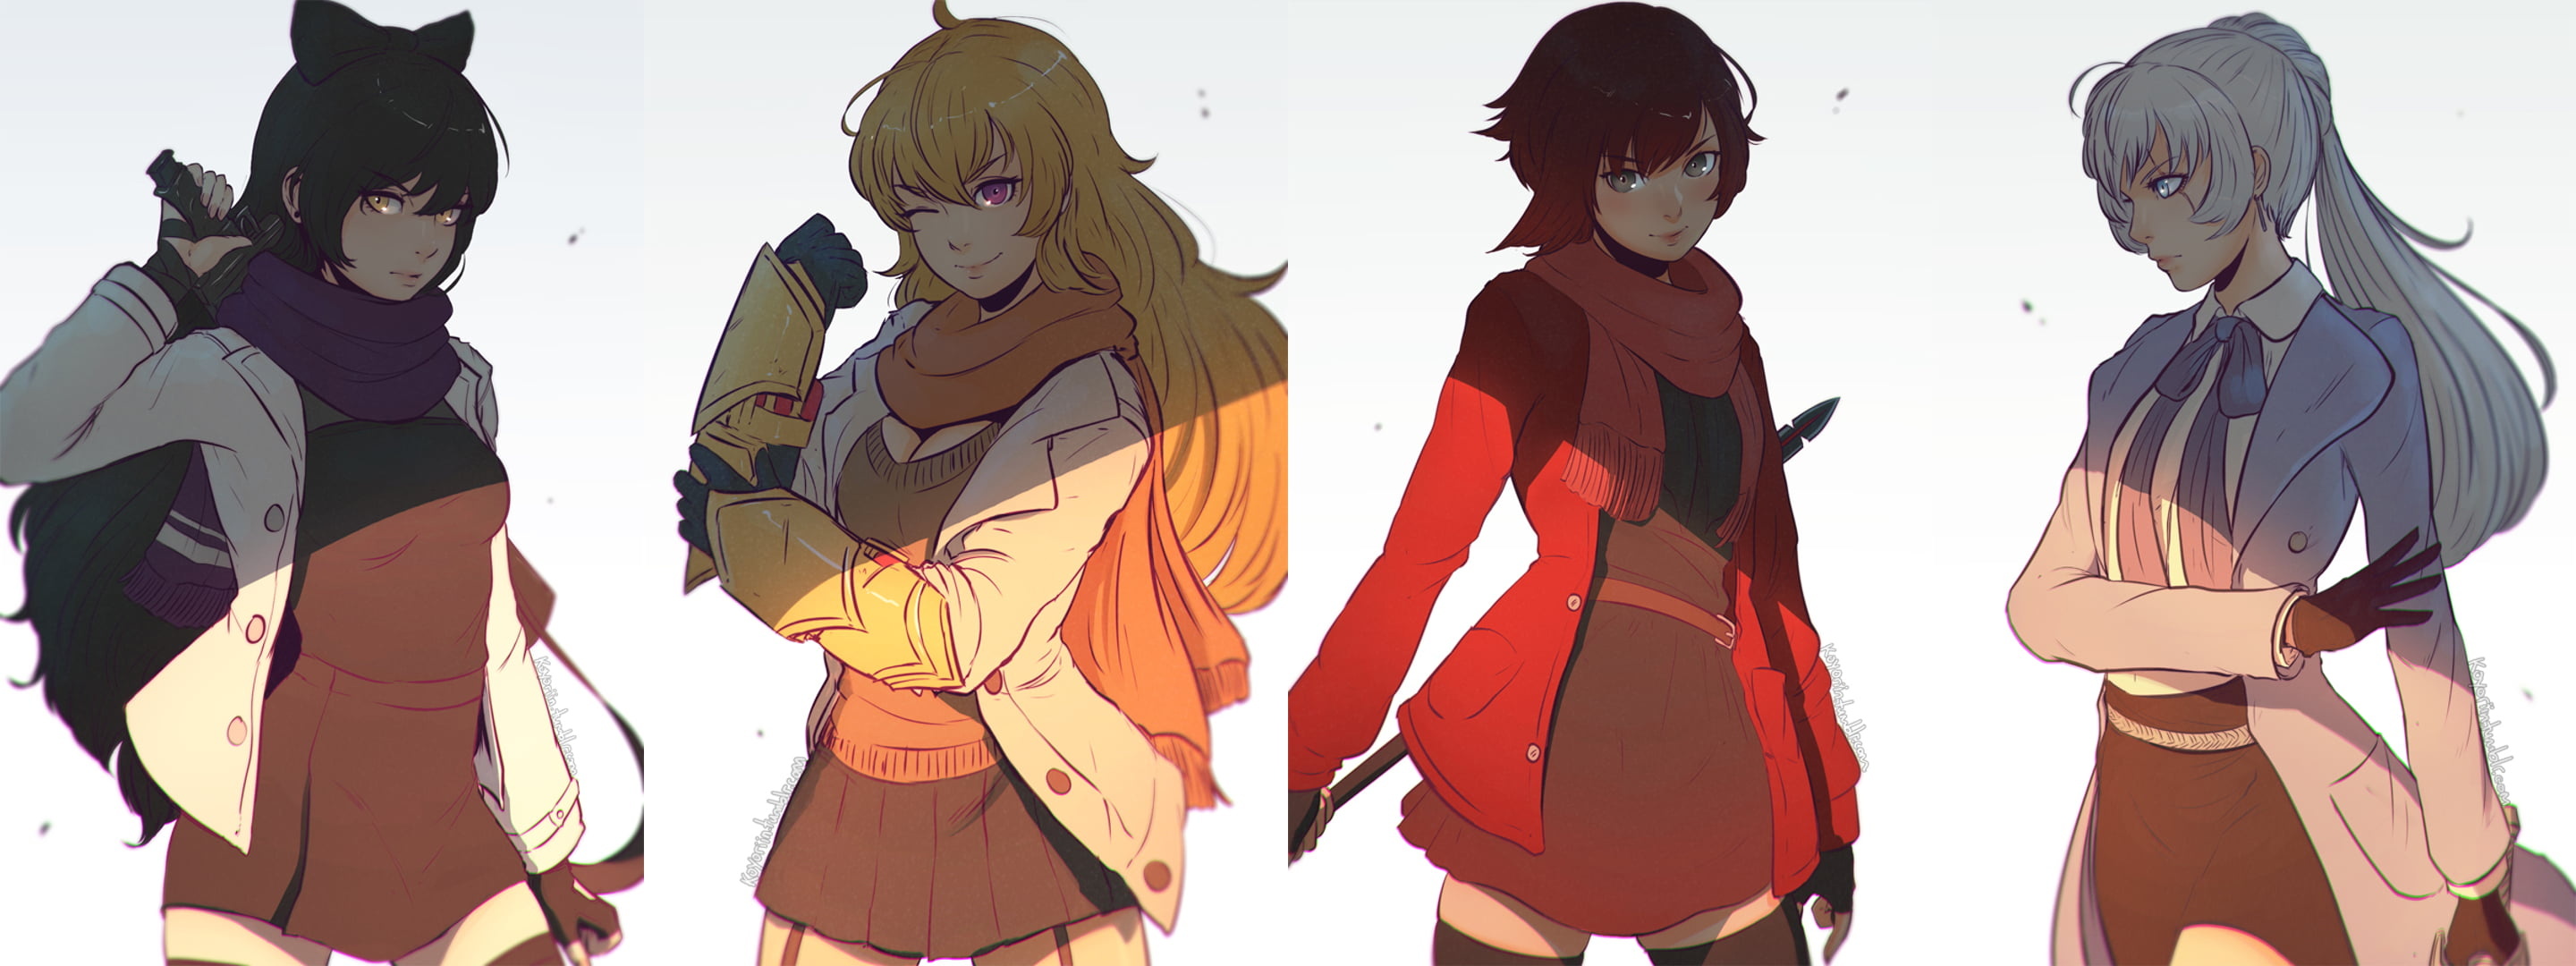 Weiss Schnee in frame, Yang Xiao Long depiction, Animated character display, RWBY collaboration, design, 2880x1080 Dual Screen Desktop